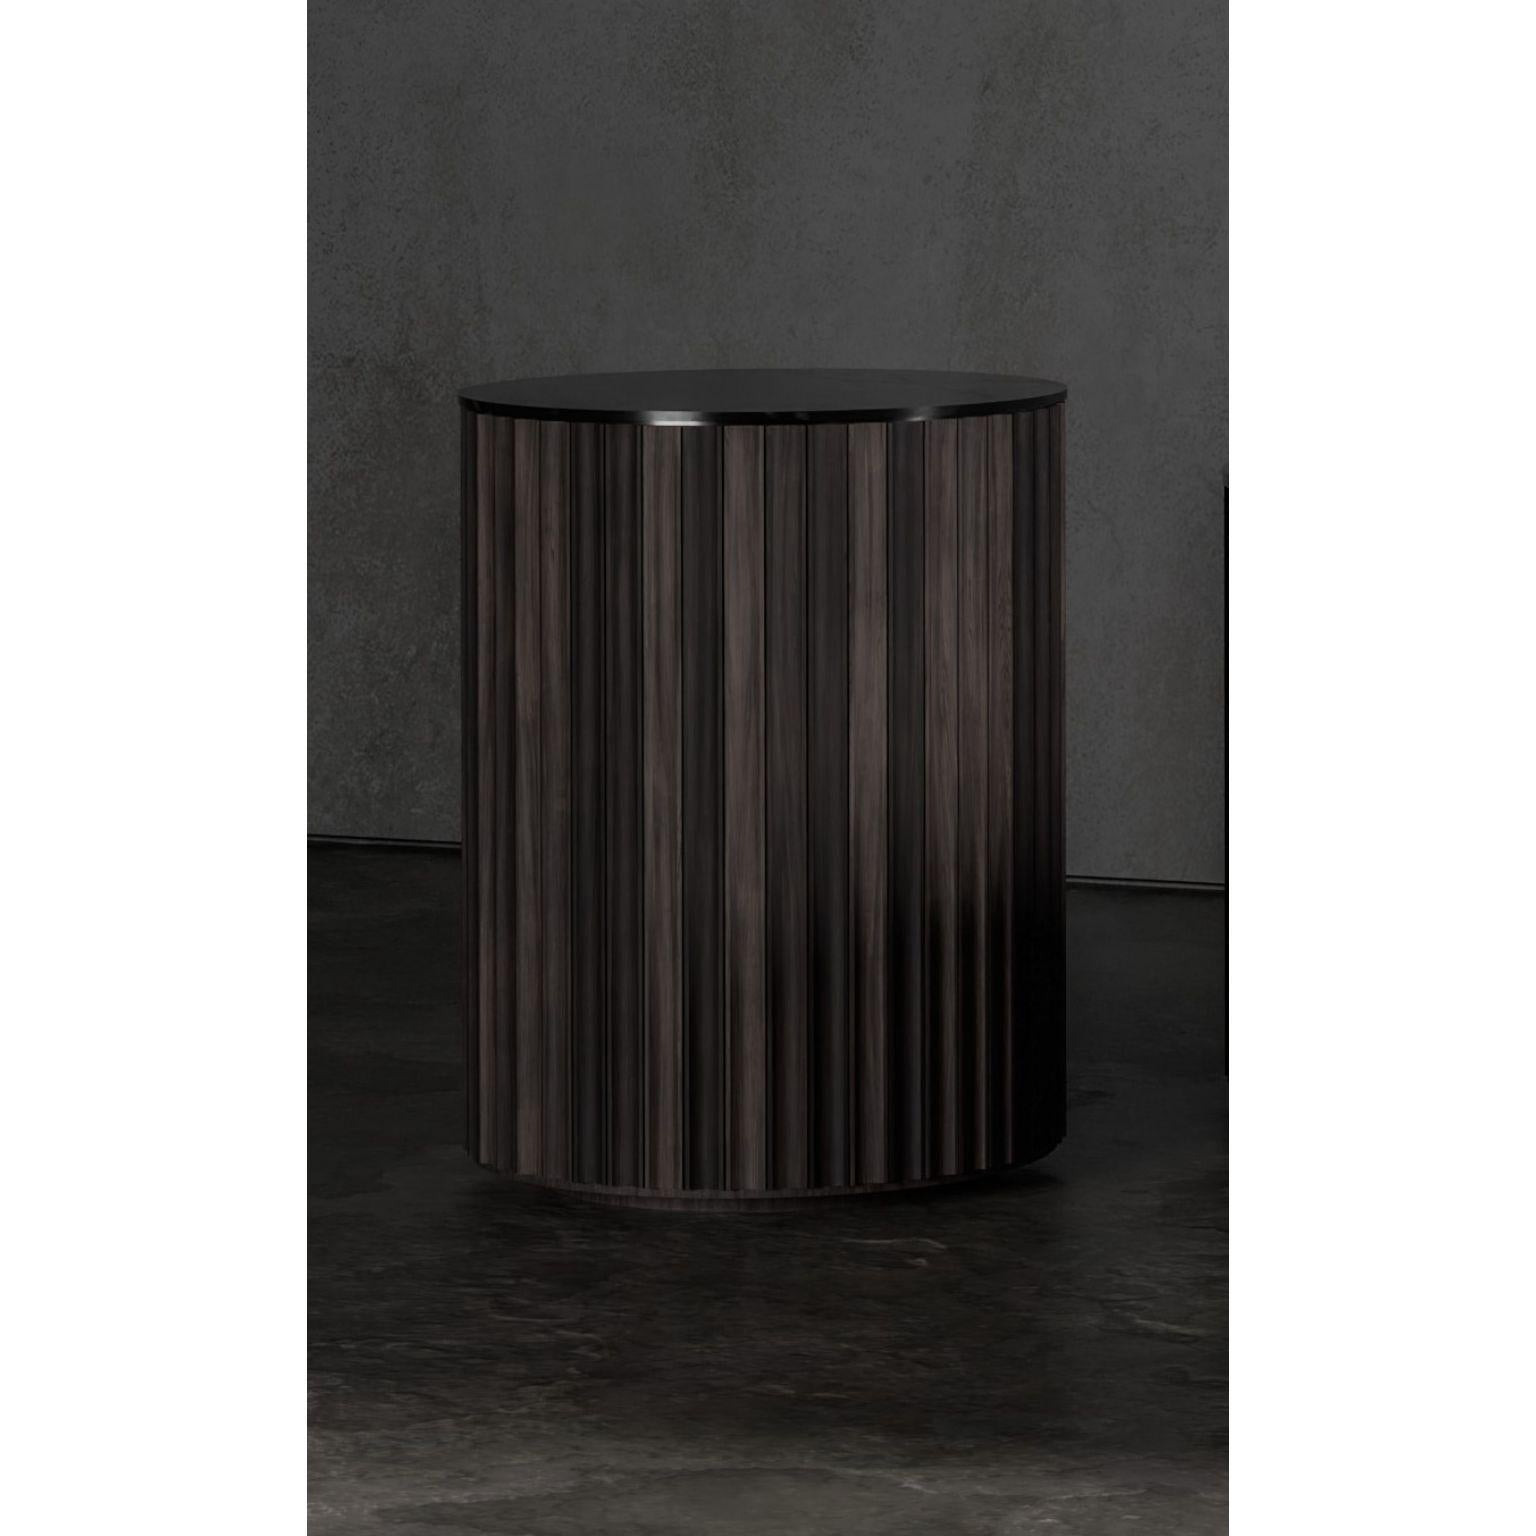 Pilar end table by Indo Made
One of a kind.
Dimensions: Ø40.6 X H53.3 cm 
Materials: oxidized oak, Nero Marquina Marble top.

Also available in other materials and finishes. 
Each piece is carefully handcrafted by our team using natural